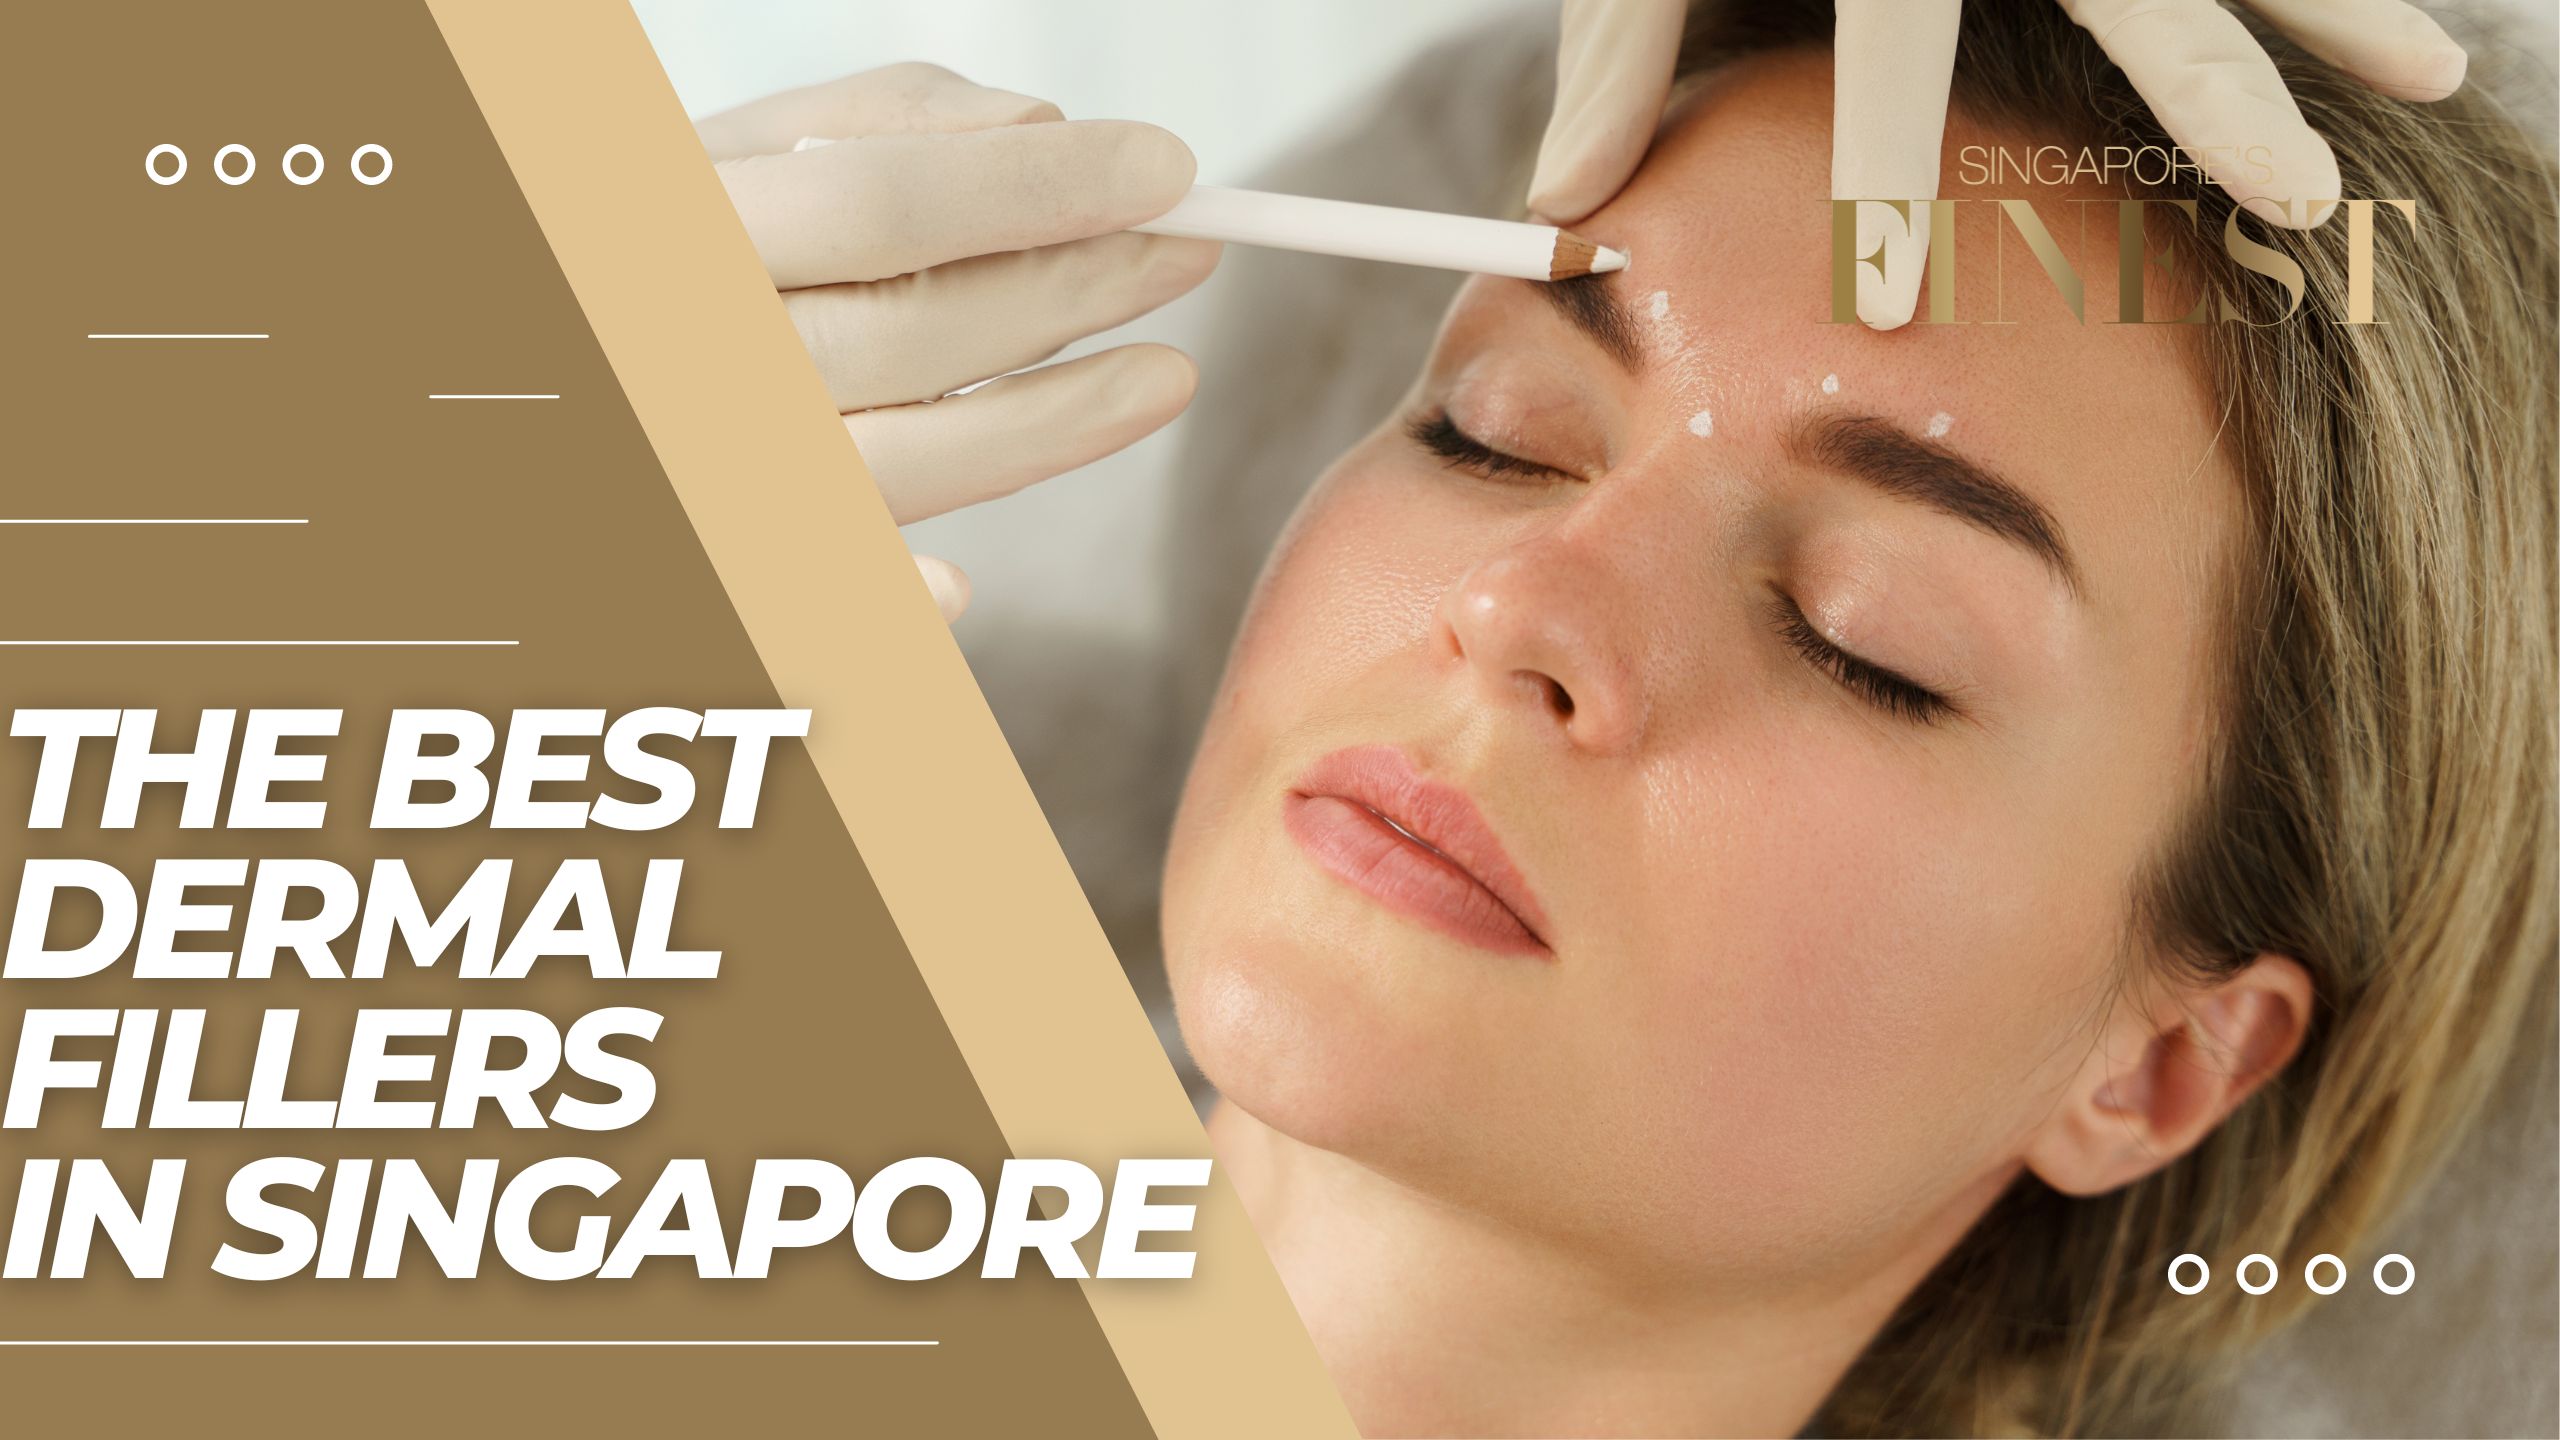 The Finest Dermal Fillers in Singapore